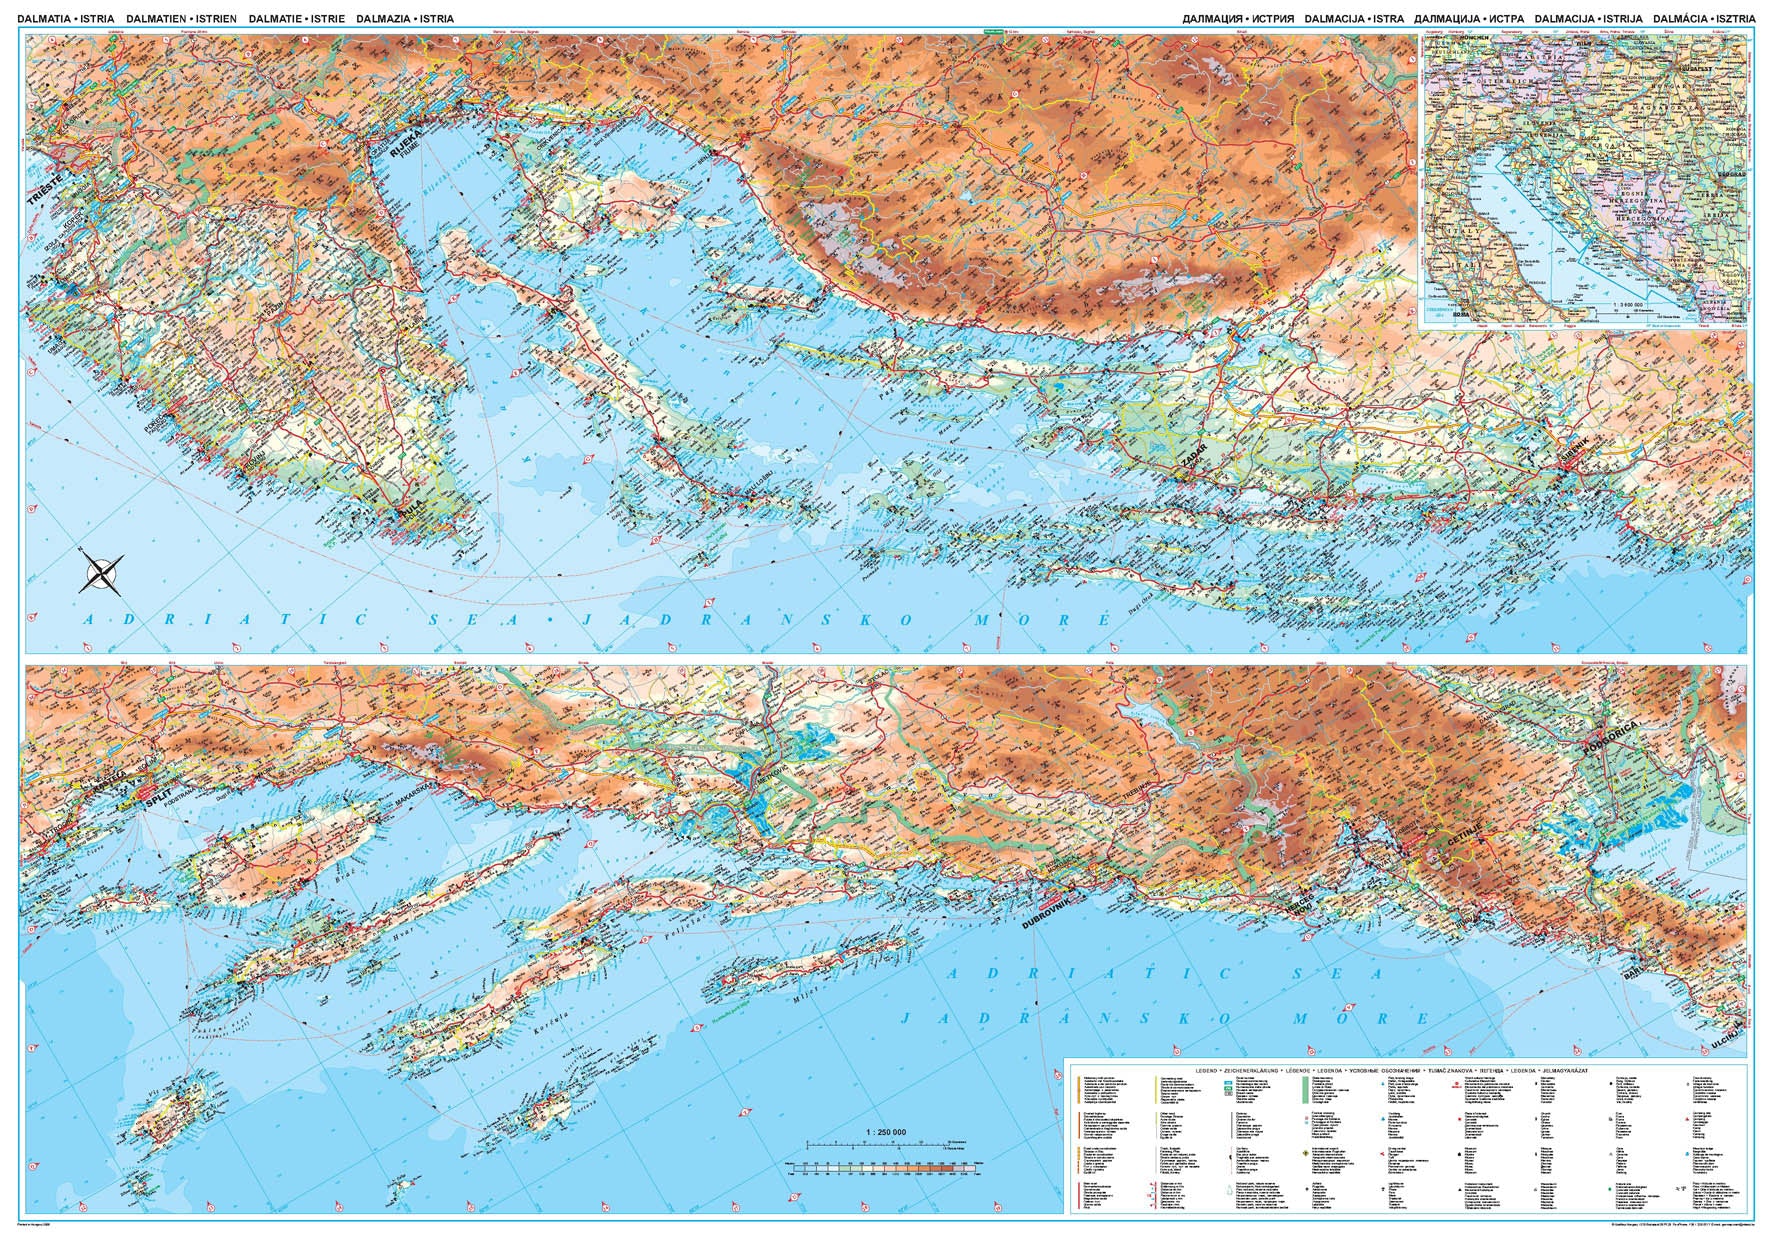 Dalmatien, Istrien 1:250.000 Geographical map